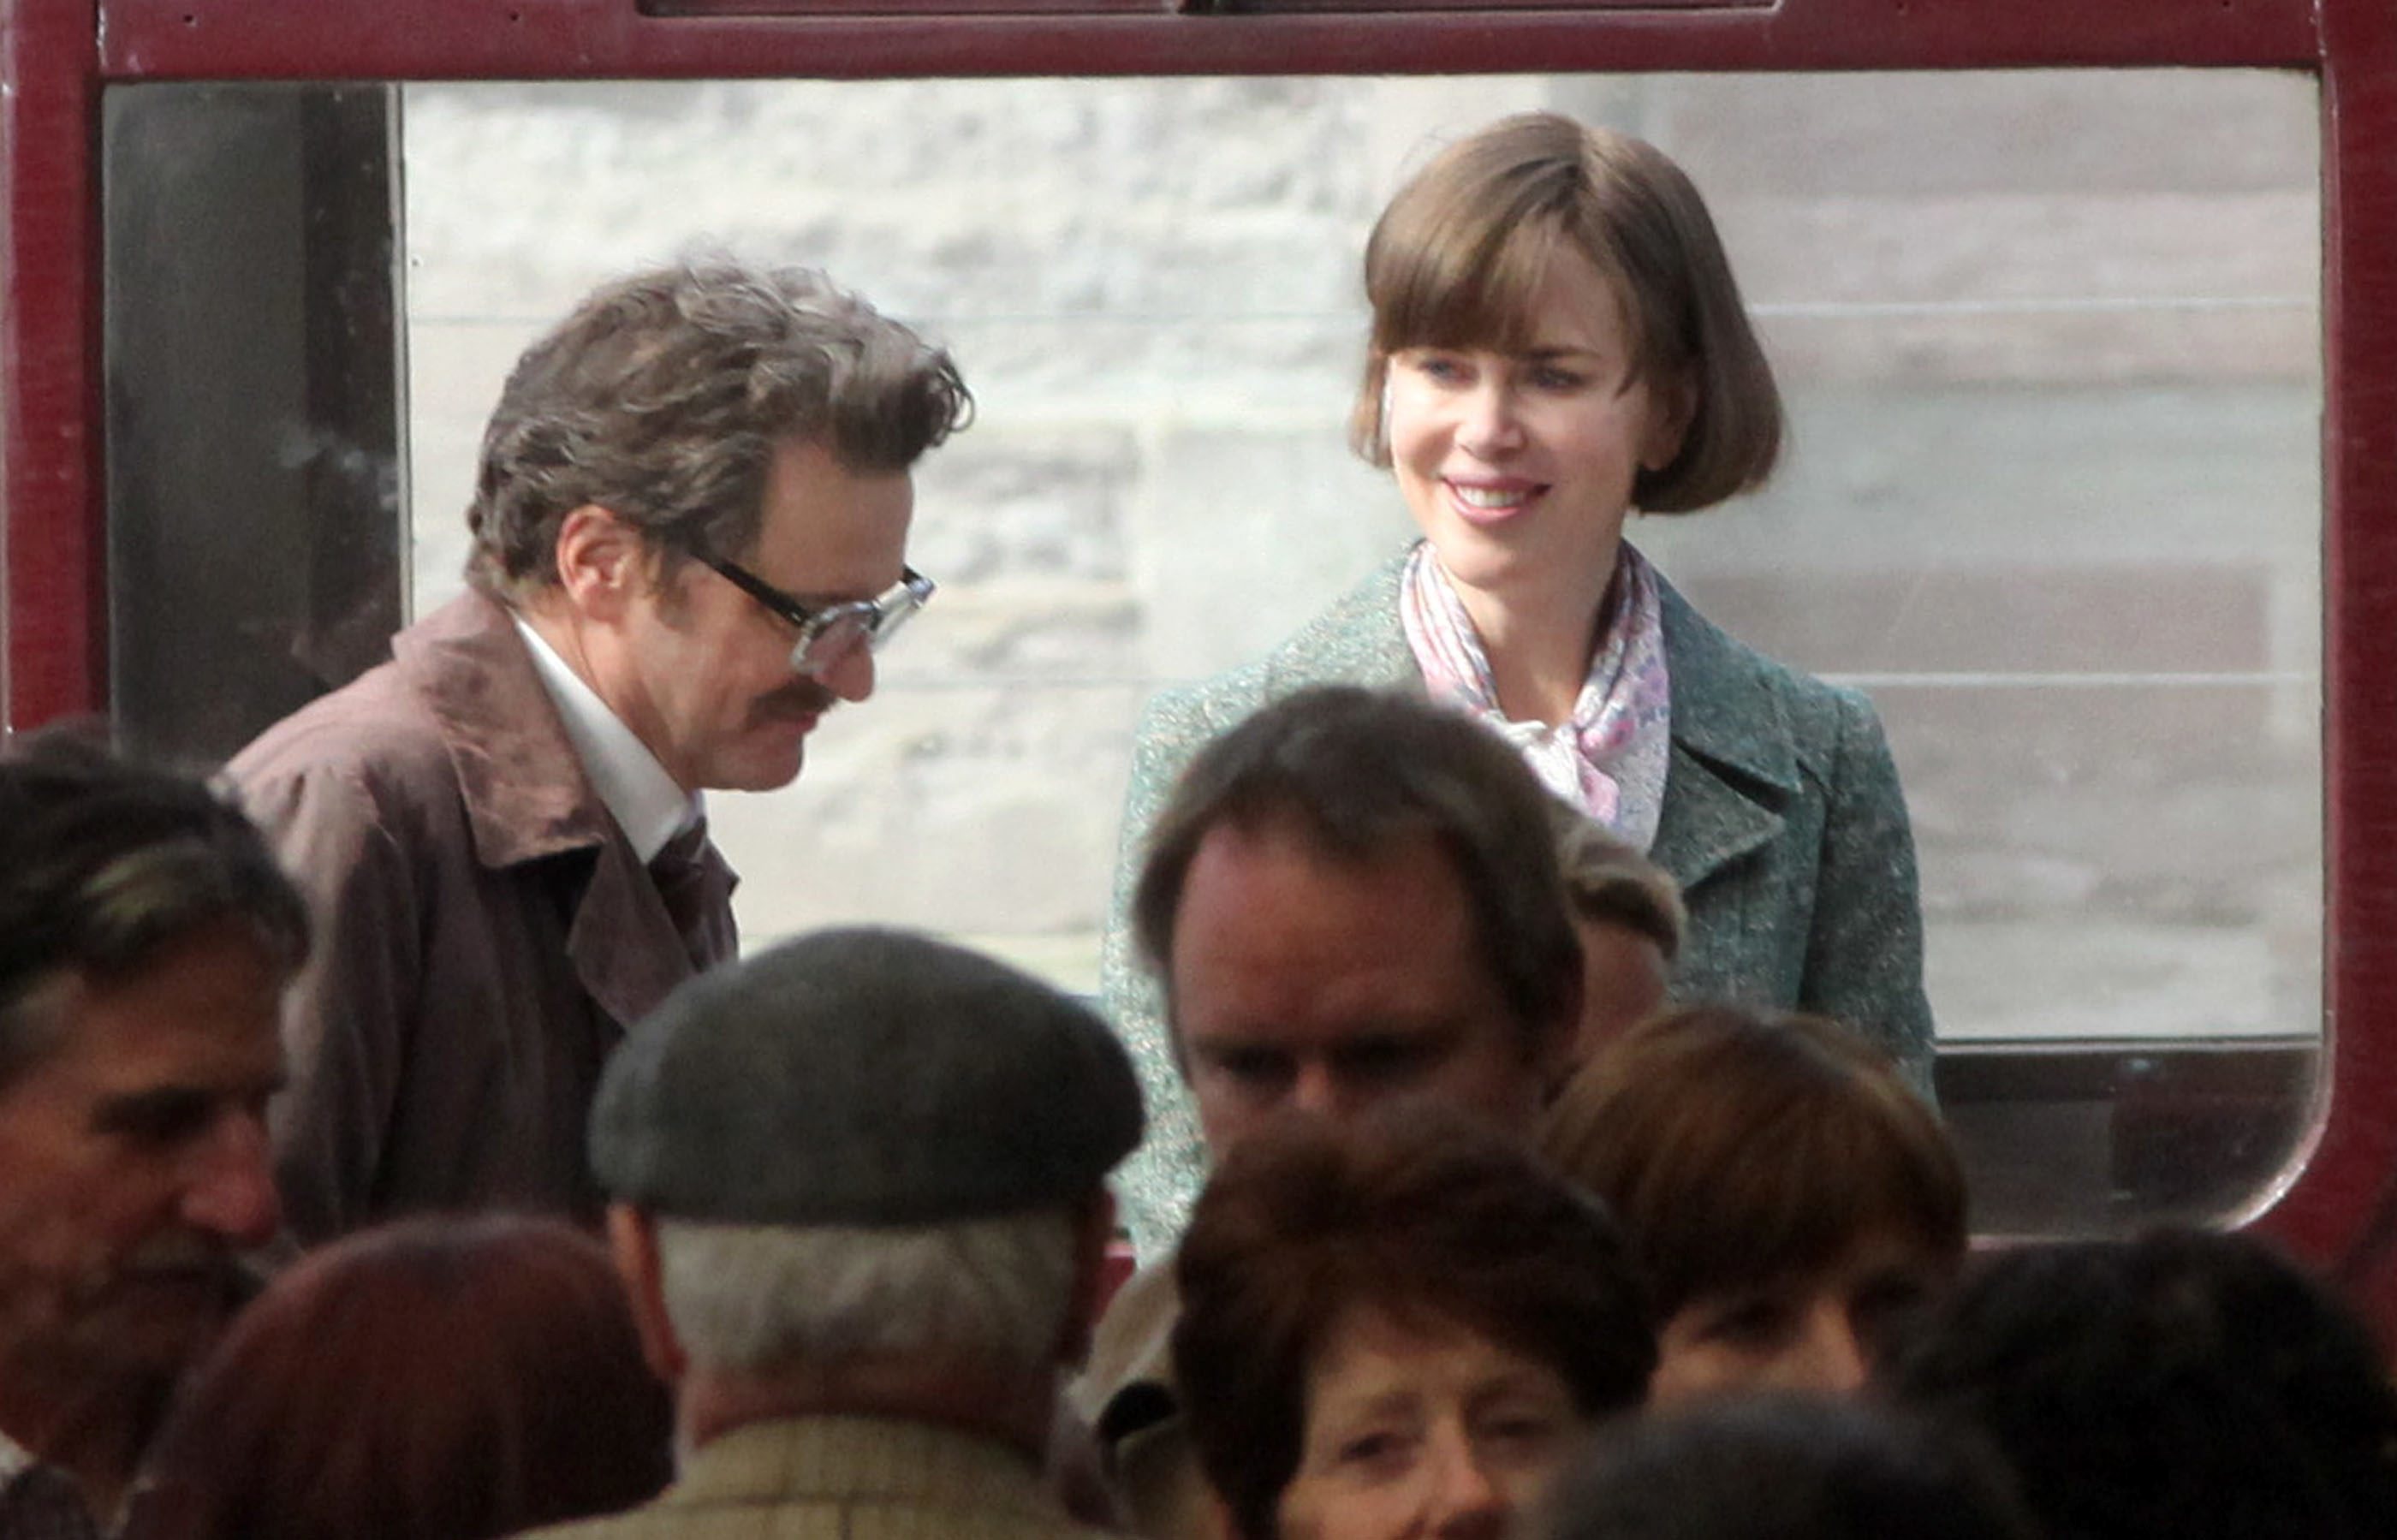 Colin Firth and Nicole Kidman film a scene from The Railway Man at Perth Train Station, Perth, May 1 2012. The celebrity couple are filming the story of Scots soldier Eric Lomax, who survived Japans infamous Burma Railway during the Second World War.